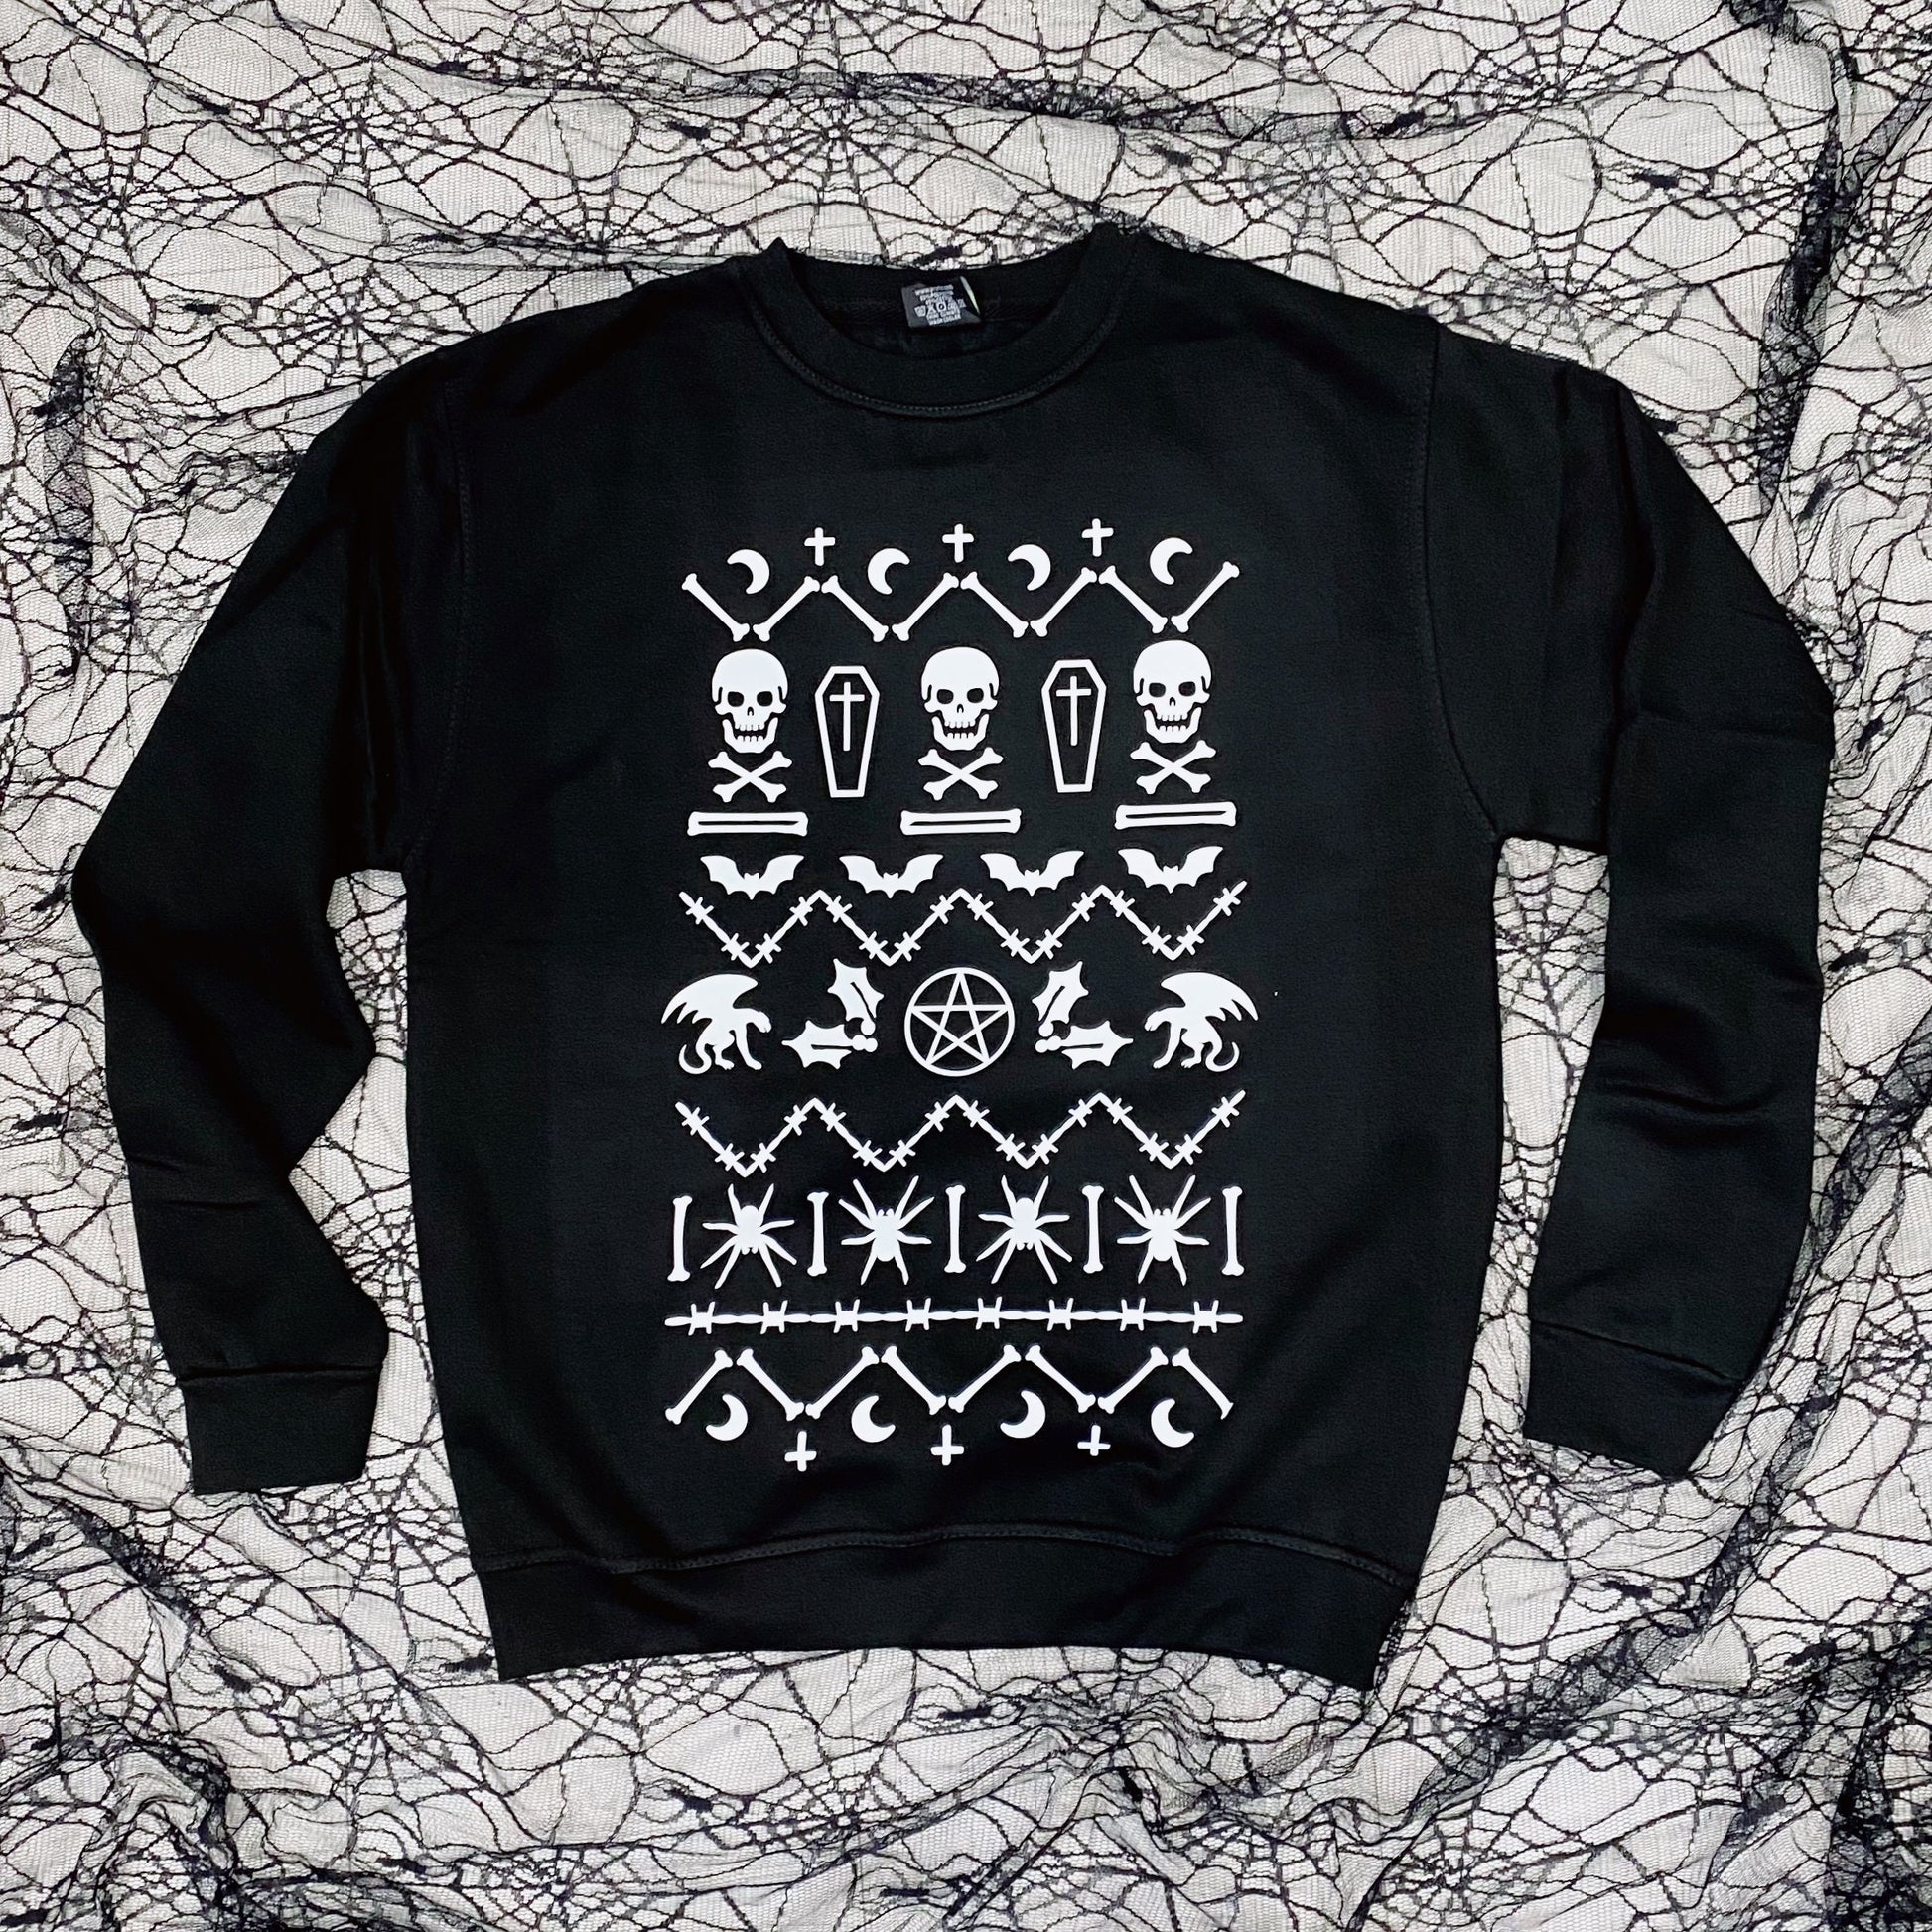 ben holland recommends goth ugly christmas sweater pic